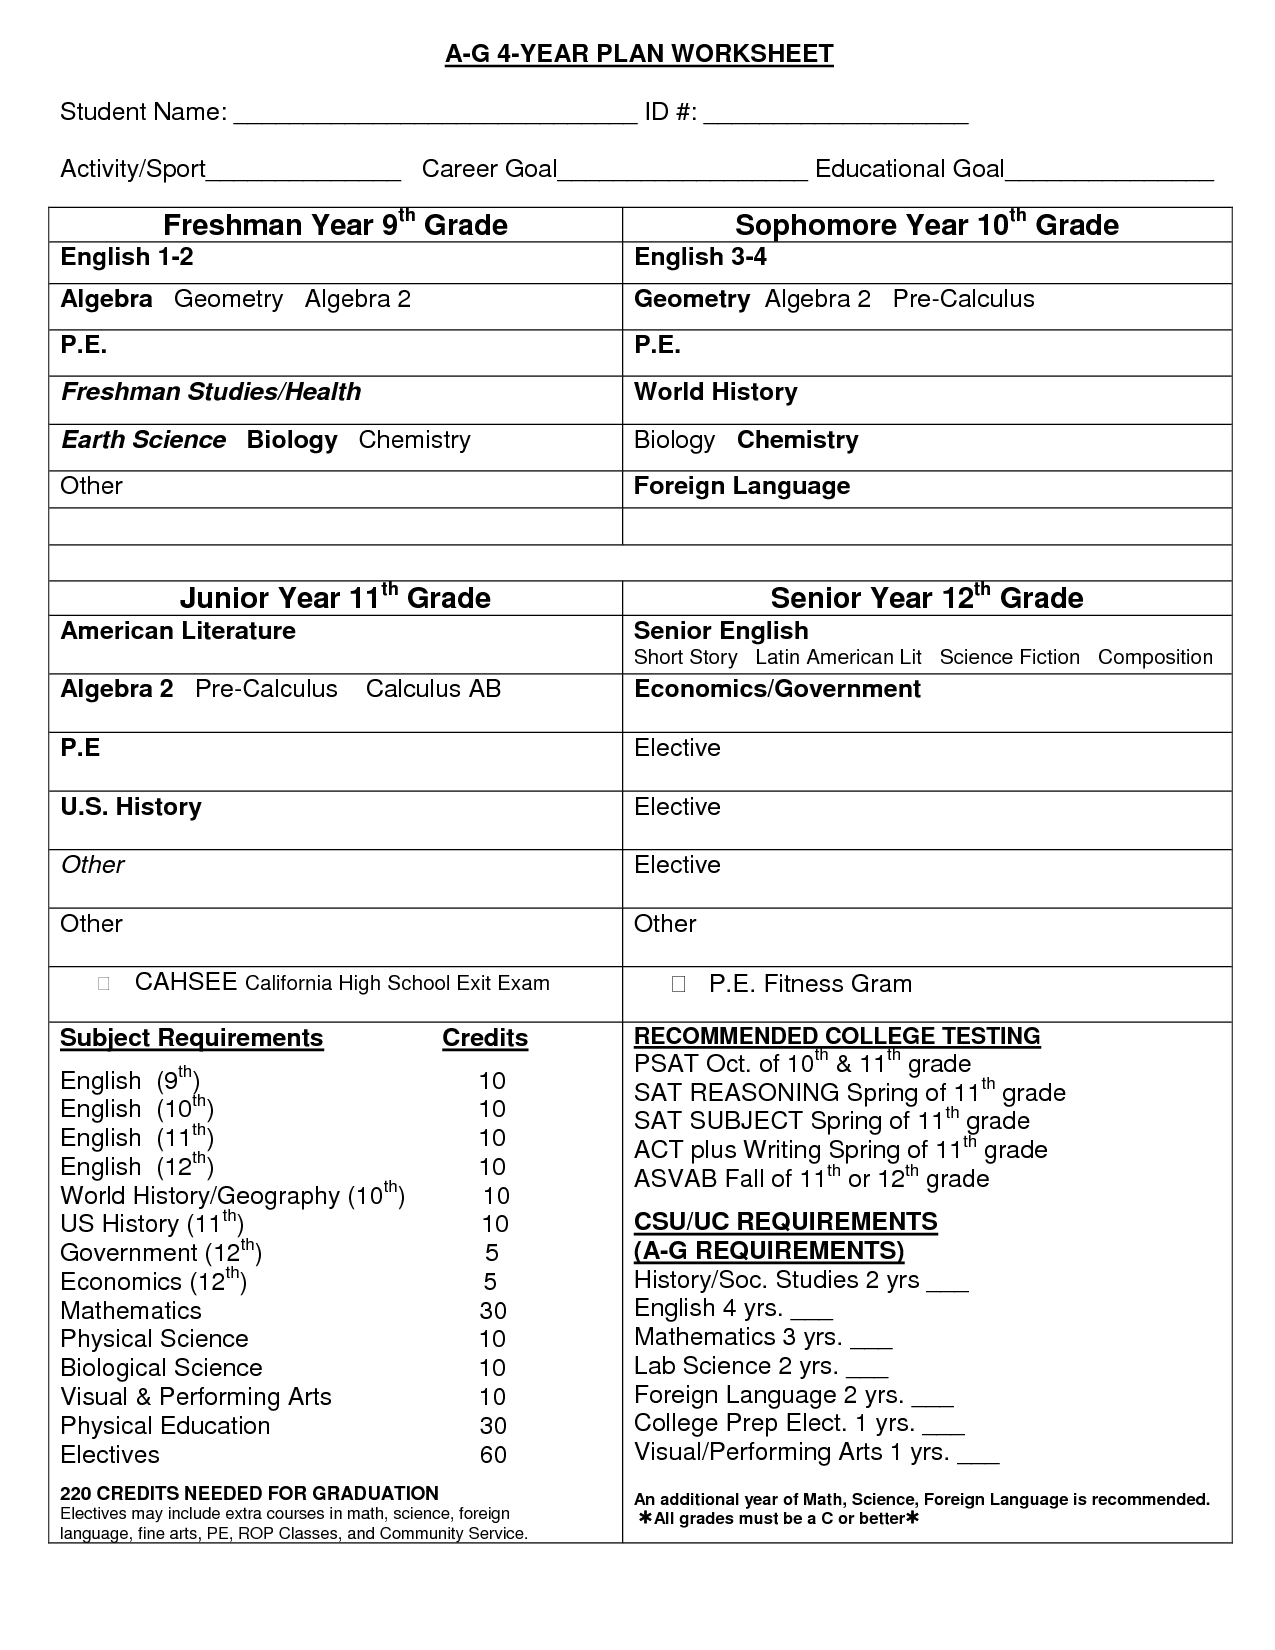 17 Best Images of 11th Grade Science Worksheets - 11th ...